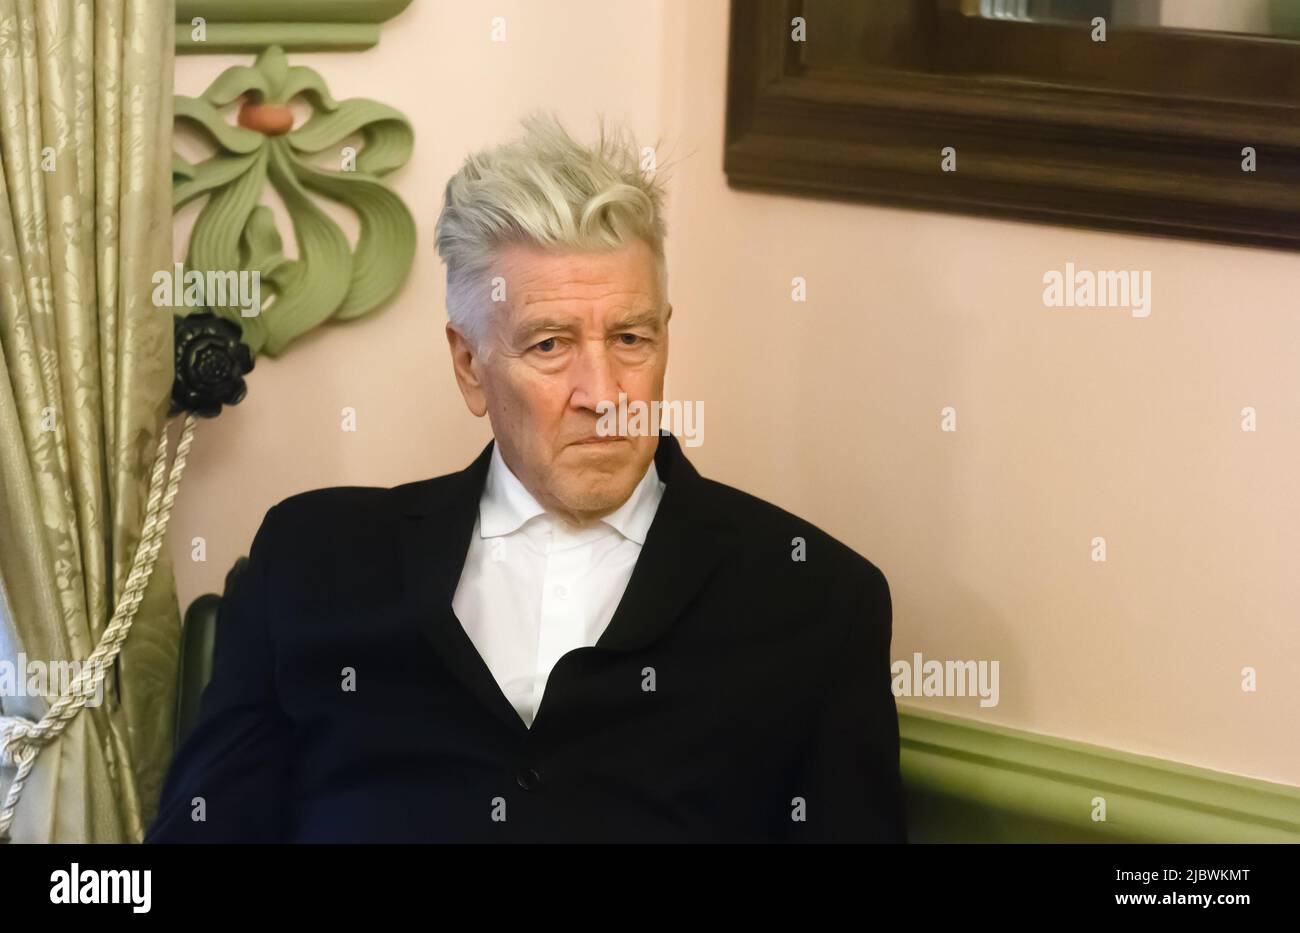 American film director, screenwriter, producer and actor David Lynch arrived in Ukraine to open an office of his charitable foundation. The film director David Keith Lynch (born January 20, 1946) is an American filmmaker, painter, visual artist, actor, musician, and writer. Stock Photo